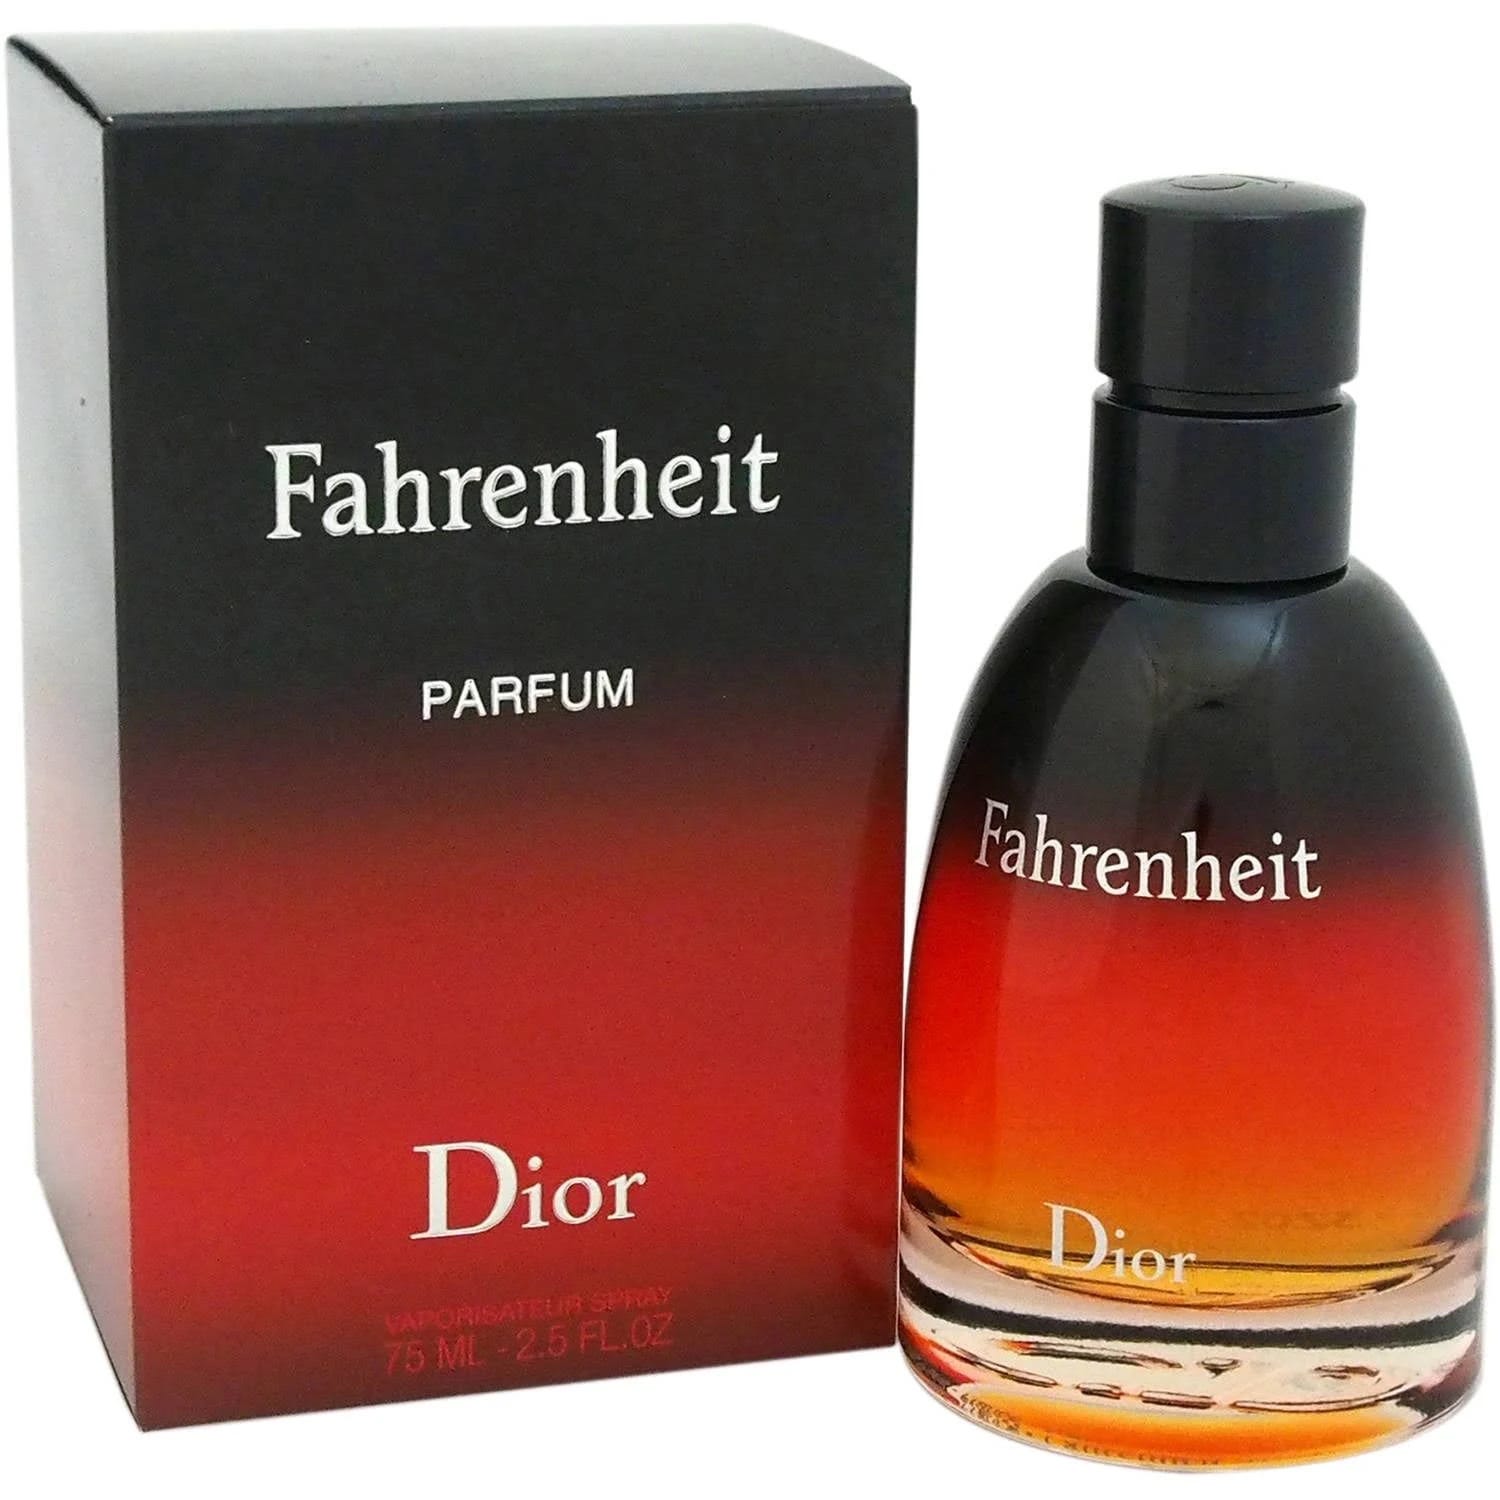 Fahrenheit by Christian Dior: A Warm, Alluring Oriental Spicy Cologne for Men | Image